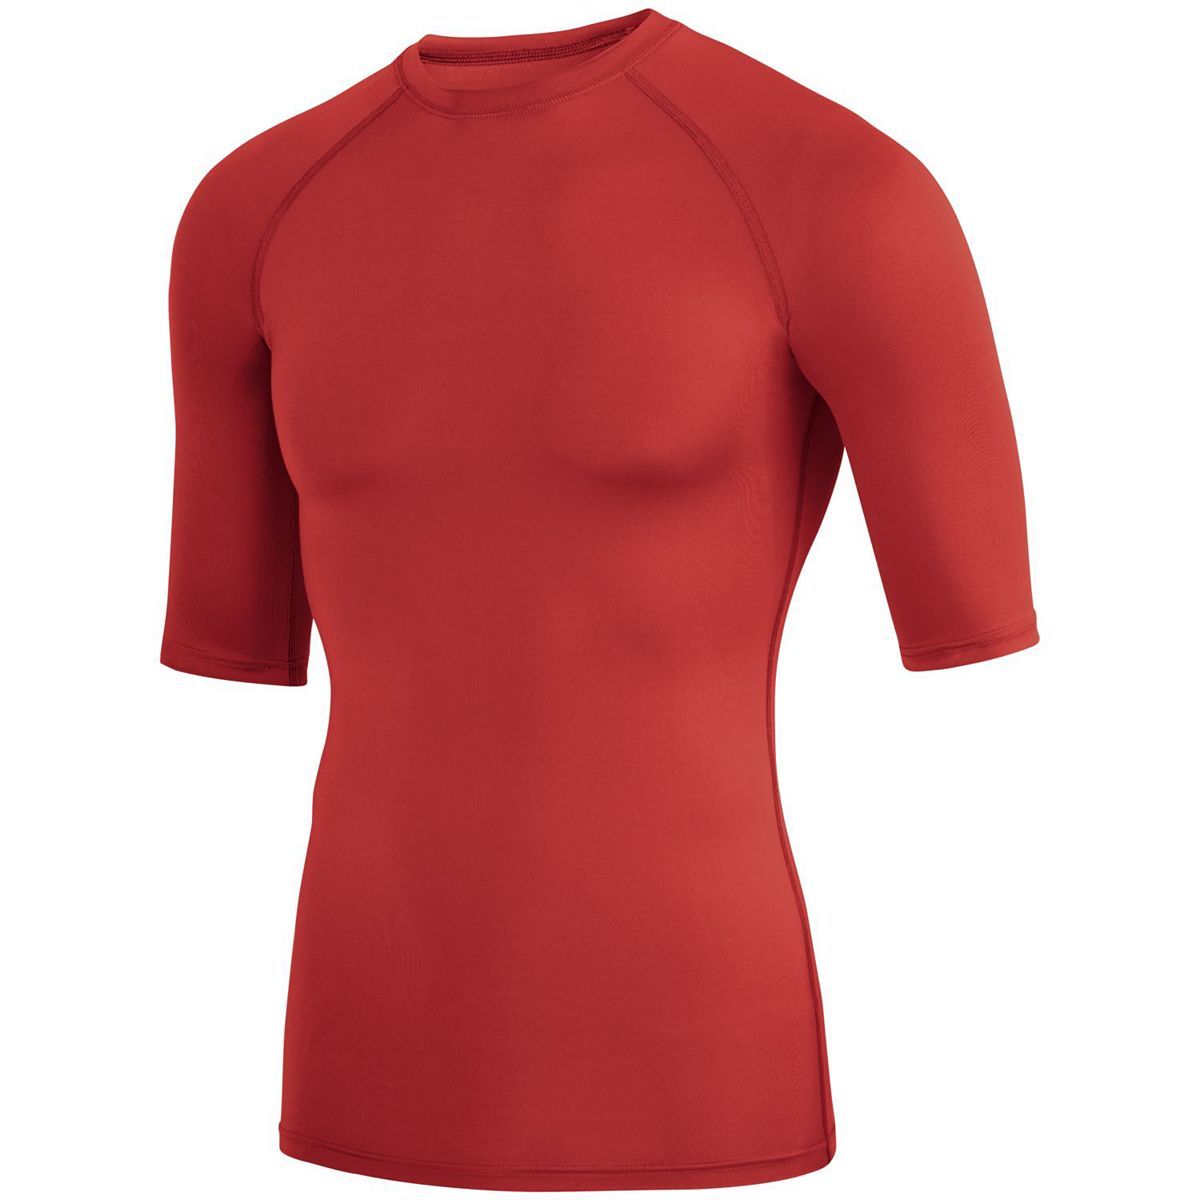 Youth Hyperform Compression Half Sleeve Tee 2607